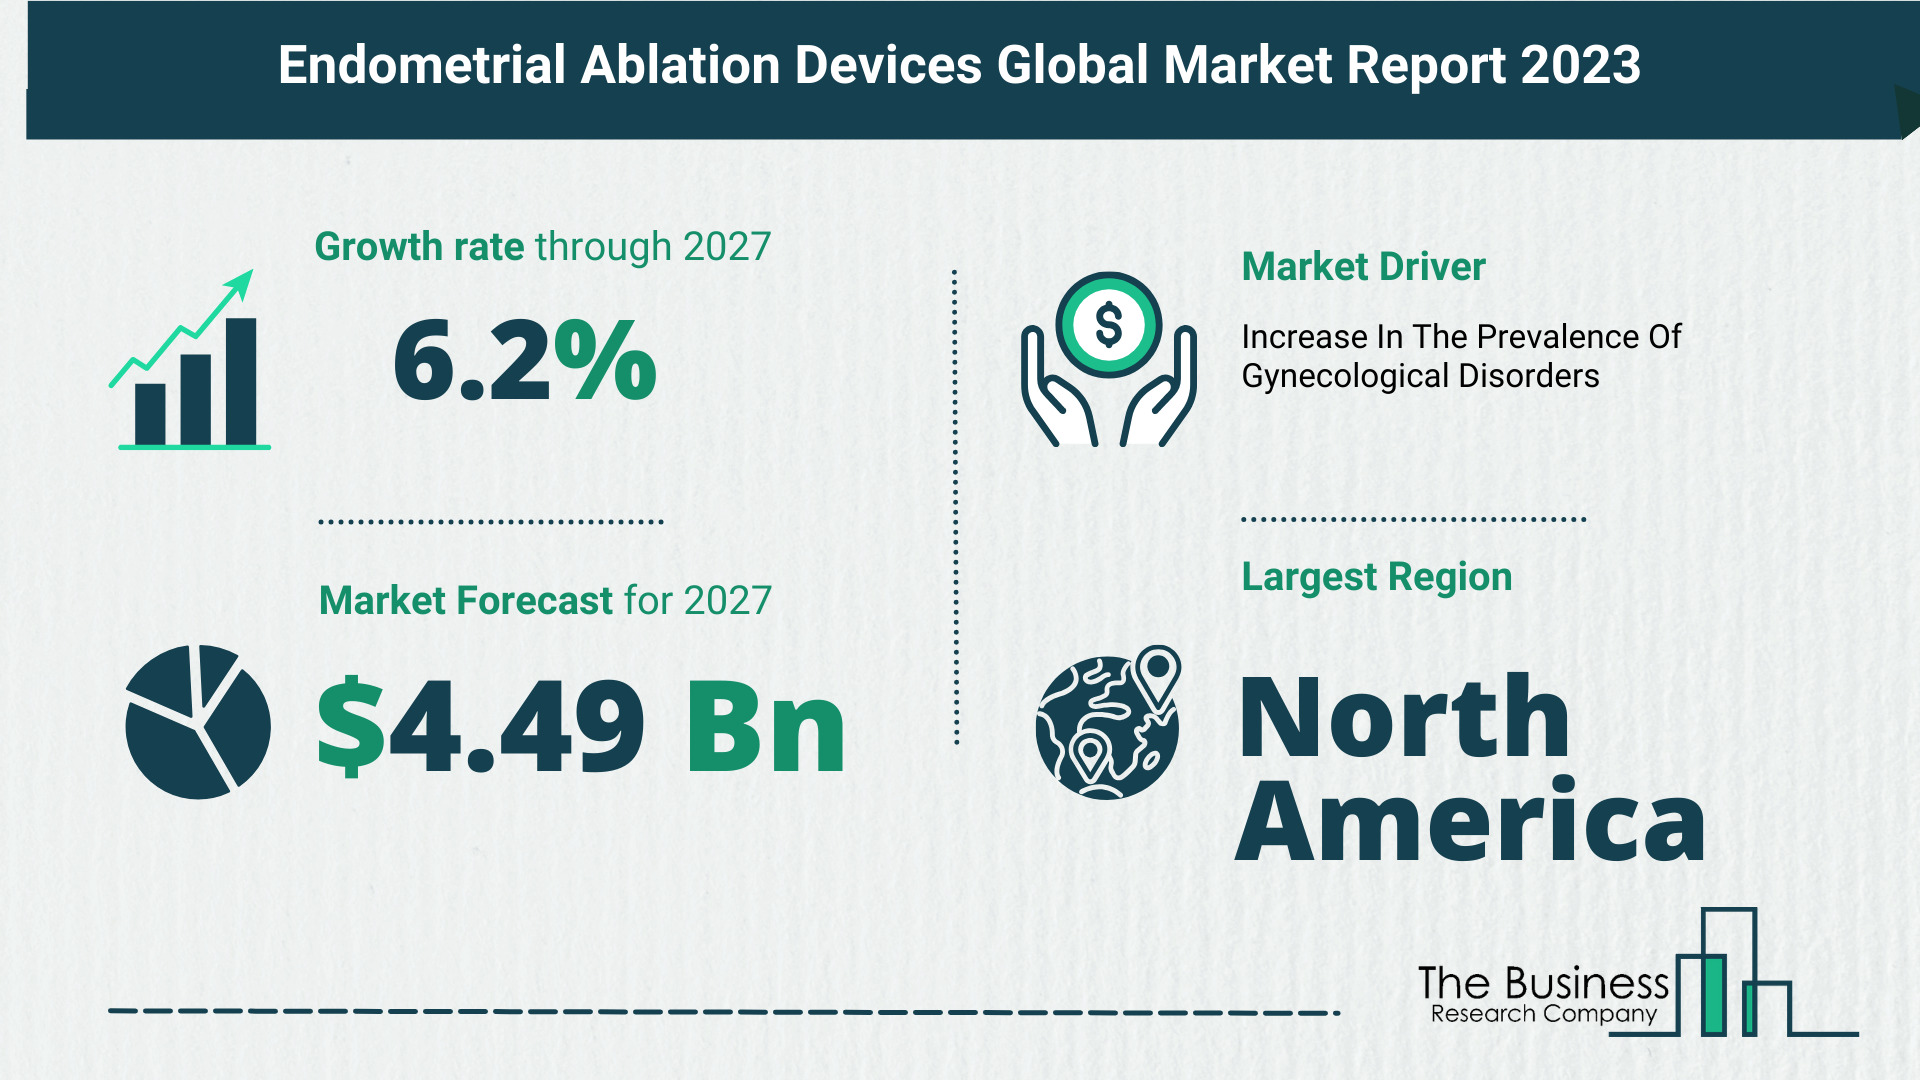 Global Endometrial Ablation Devices Market Analysis 2023: Size, Share, And Key Trends